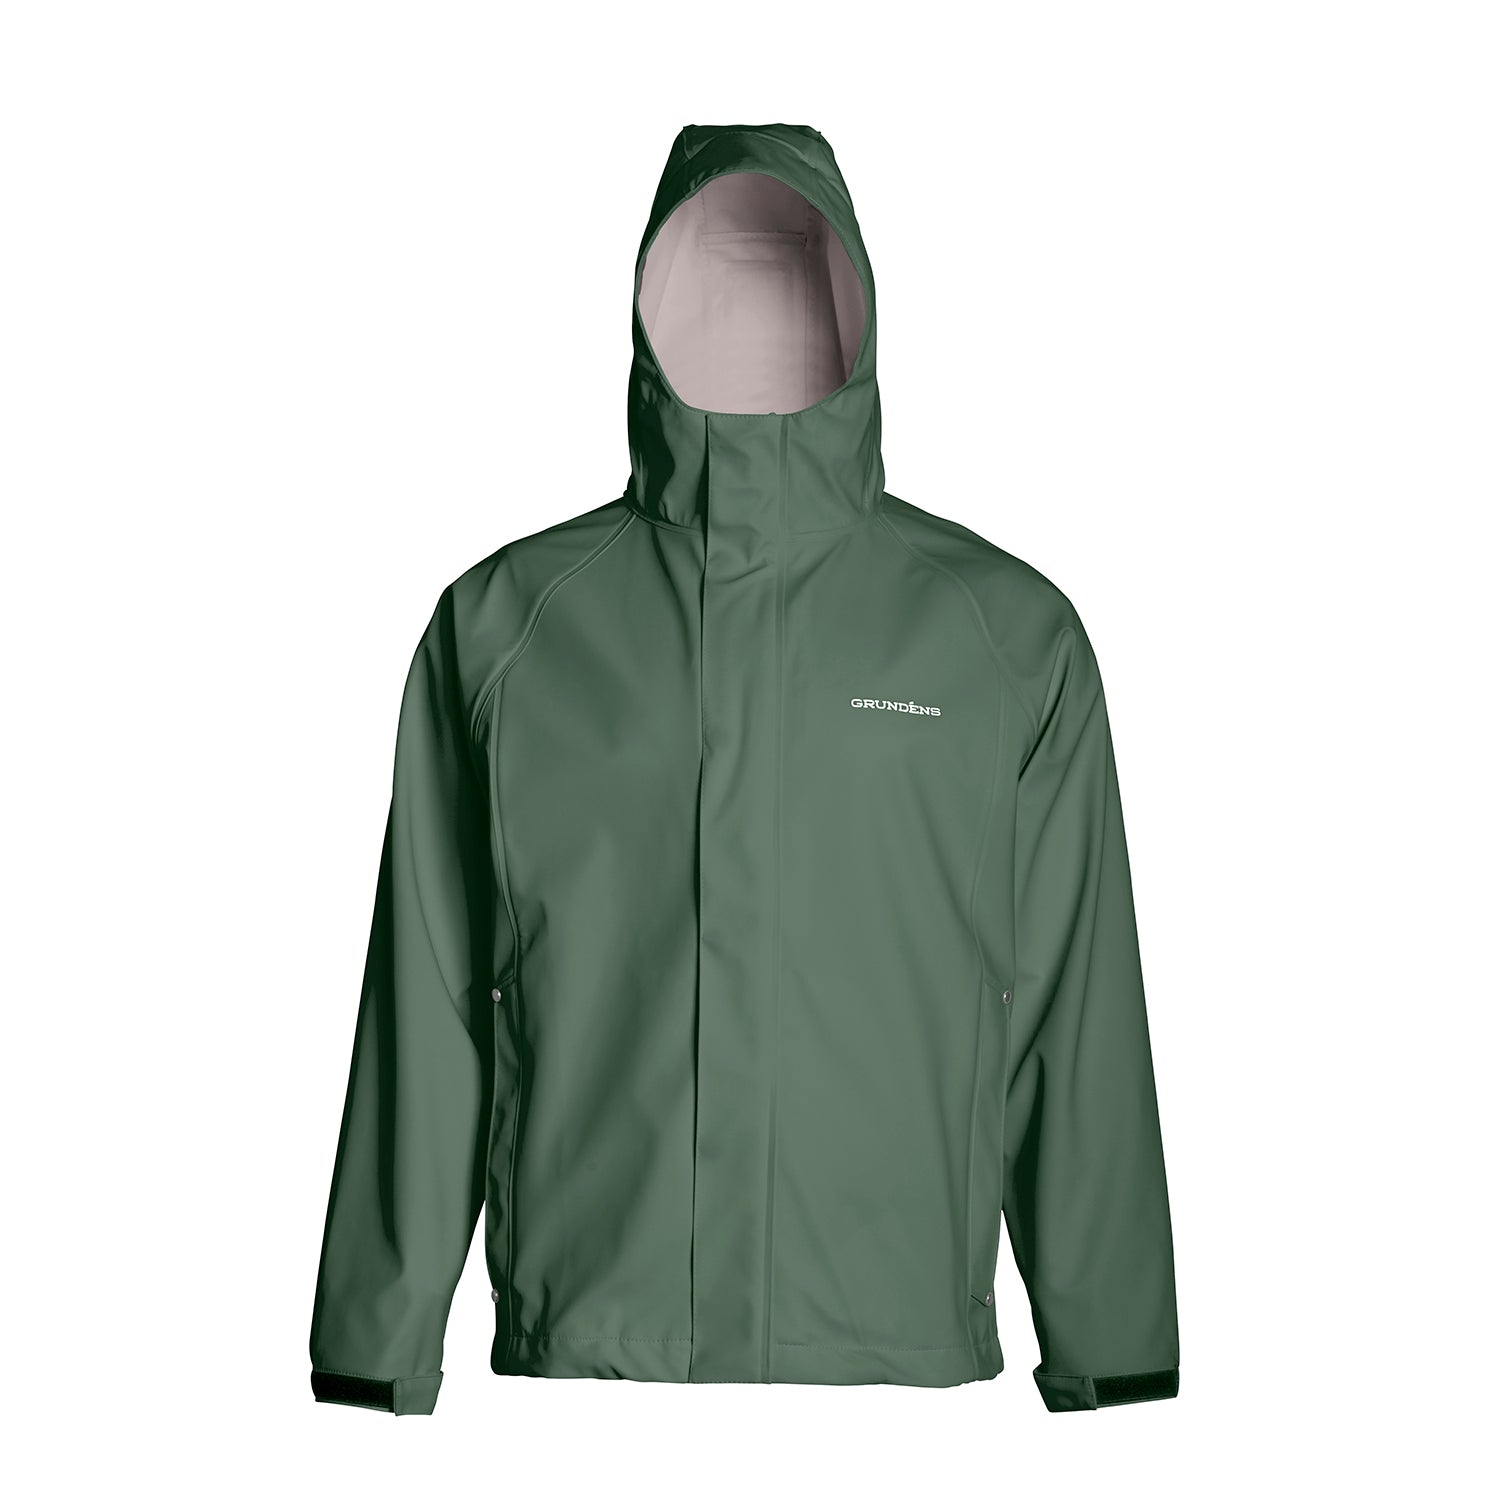 fishing jacket products for sale